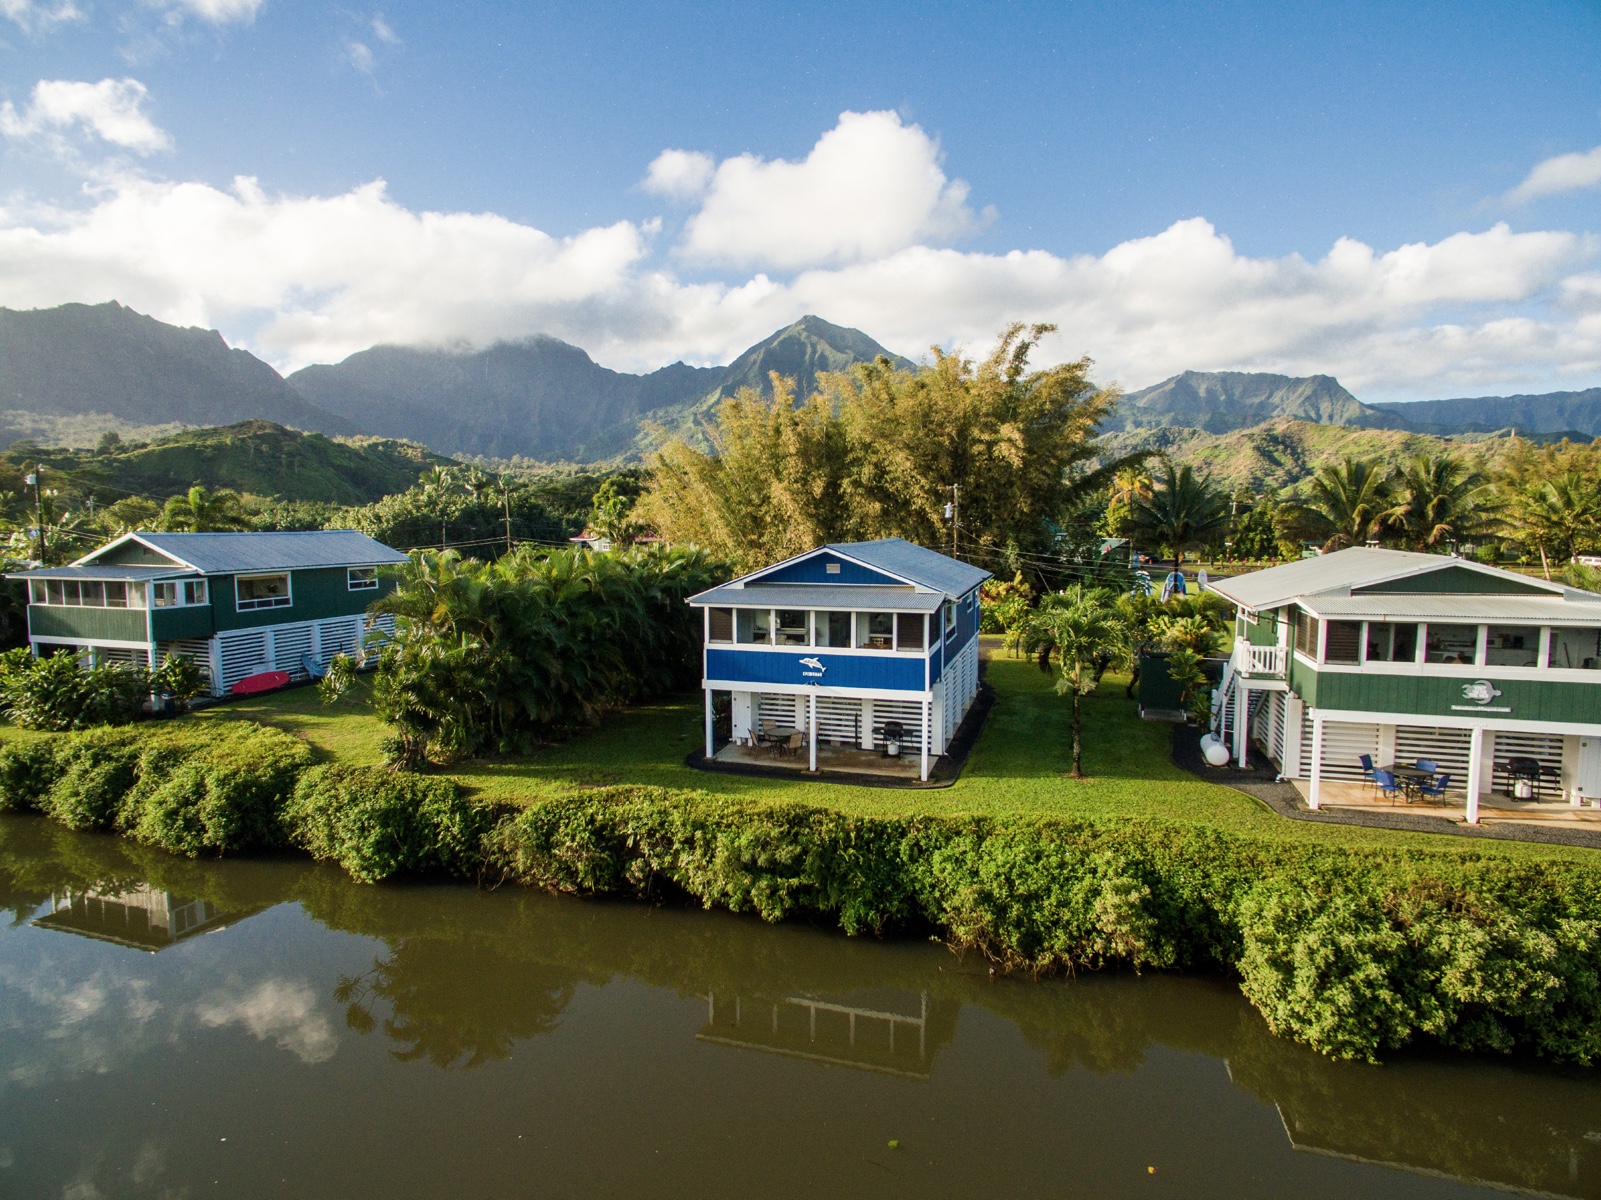 The Dolphin Cottages & Historic Hanalei Town